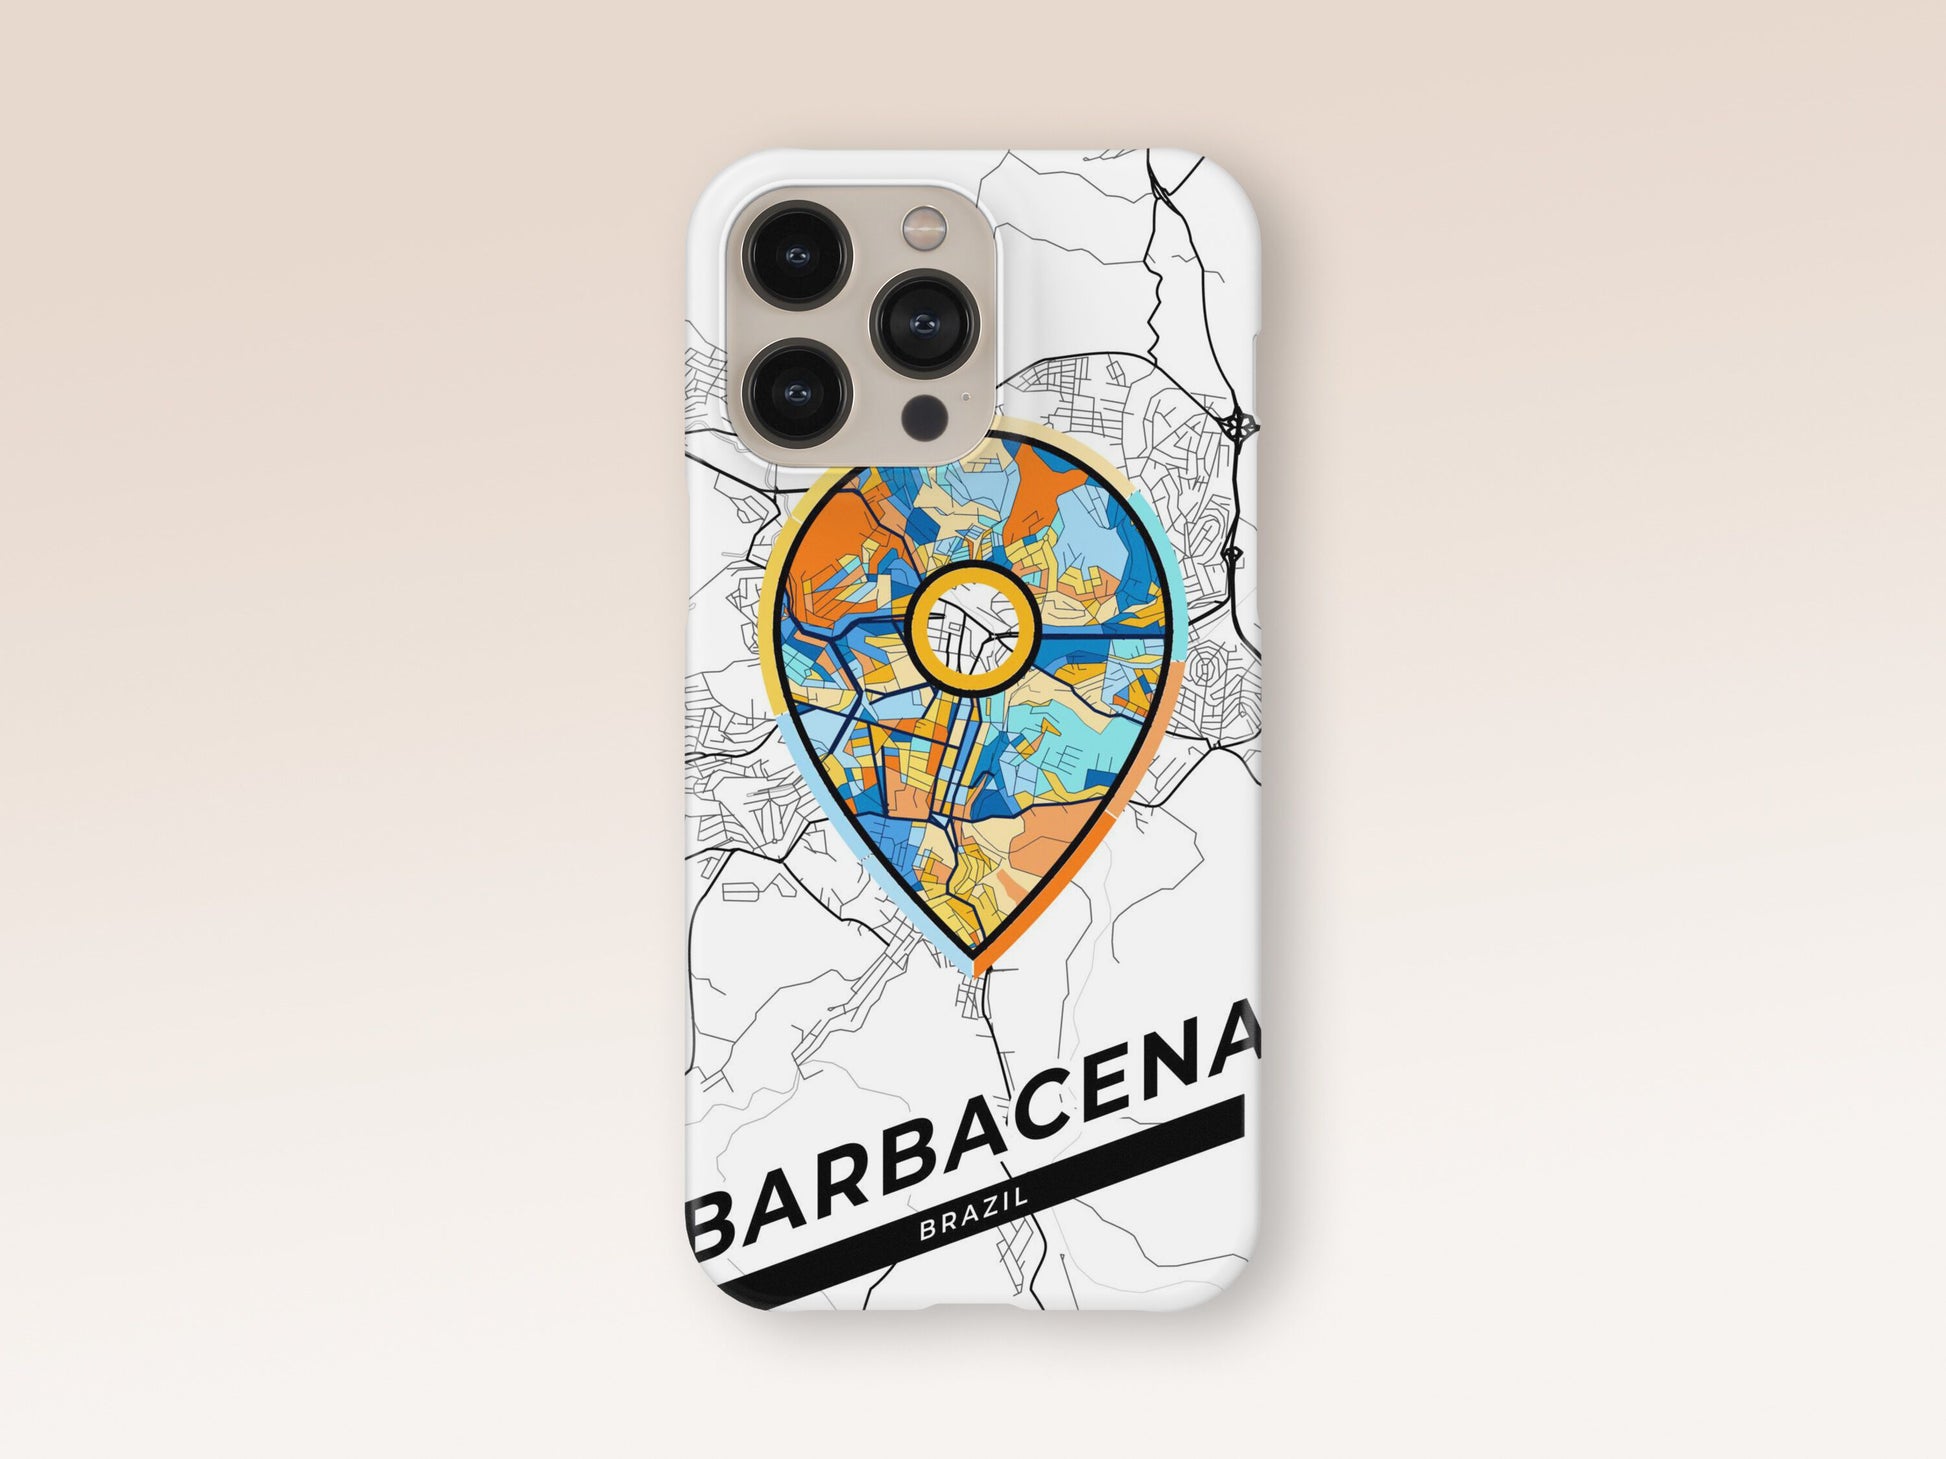 Barbacena Brazil slim phone case with colorful icon. Birthday, wedding or housewarming gift. Couple match cases. 1